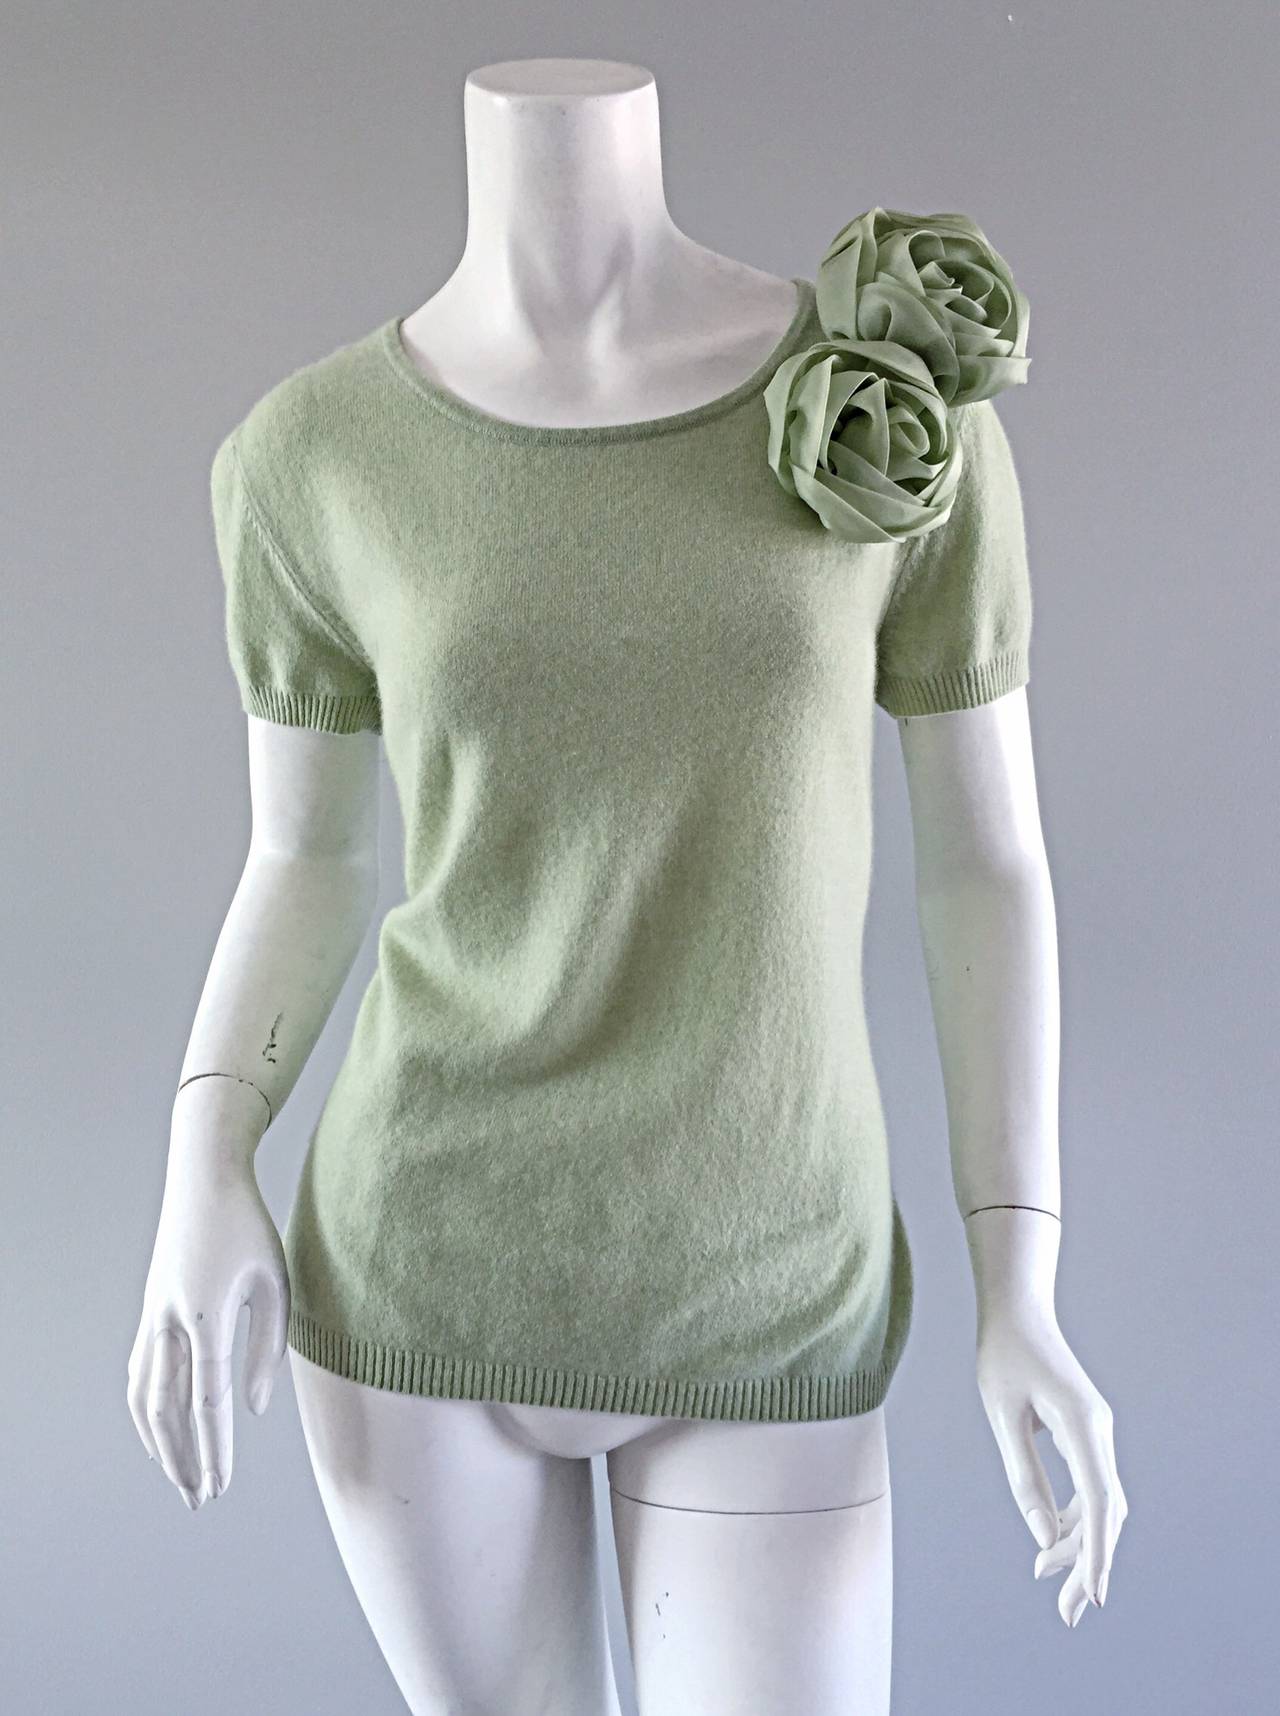 Beautiful Escada short sleeve cashmere sweater! Light green color, with silk rosettes (flower appliqués) at side shoulder. Extremely soft cashmere that is great all year. Perfect alone, or with a blouse under. In great condition. Marked Size EU